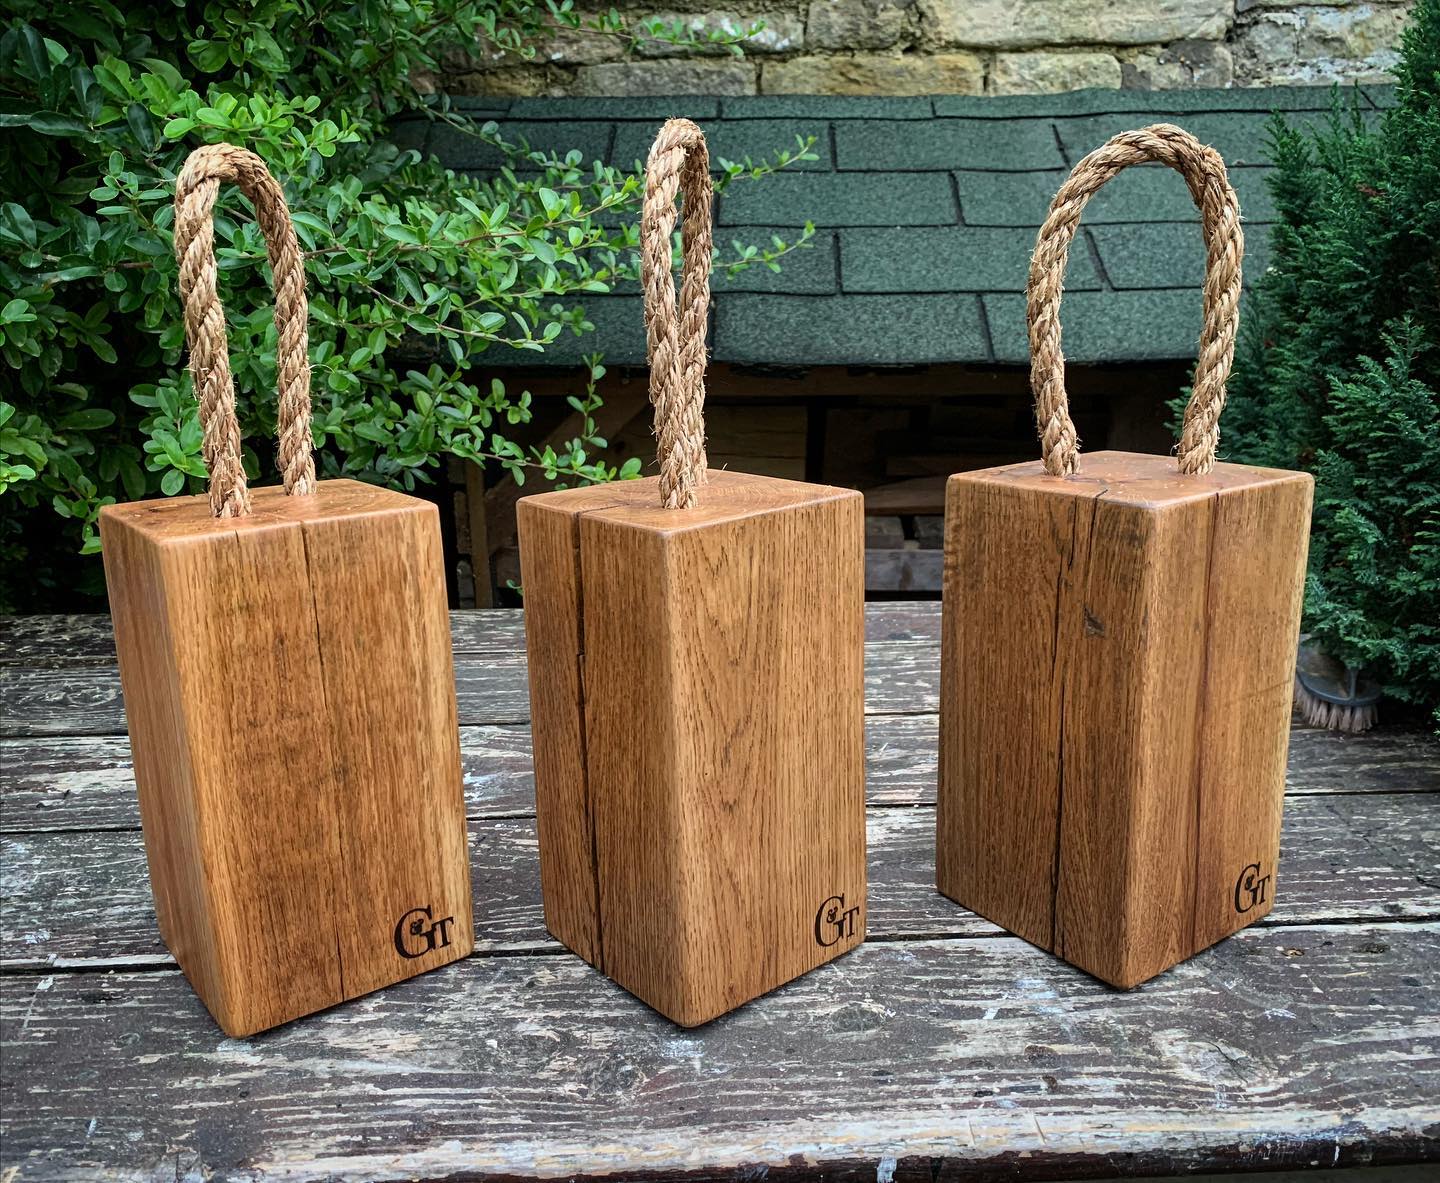 We’ll be adding more doorstops to the website this week and preparing some extras ready to take to Clevedon Sunday Market and The Craft and Flea, Bristol in early October.Heading back to real life markets is a little overwhelming, but these are two events that make us feel extremely at ease and safe....#virtualcraftandflea #clevedon #sundaymarket #bristol #postlockdownplans #shopsmall #shophandmade #supportsmallbusinesses #homewares #madebyus #ginger #tweed #oak #home #inspiredbynature #doorstop #lifestyle #community #artisan